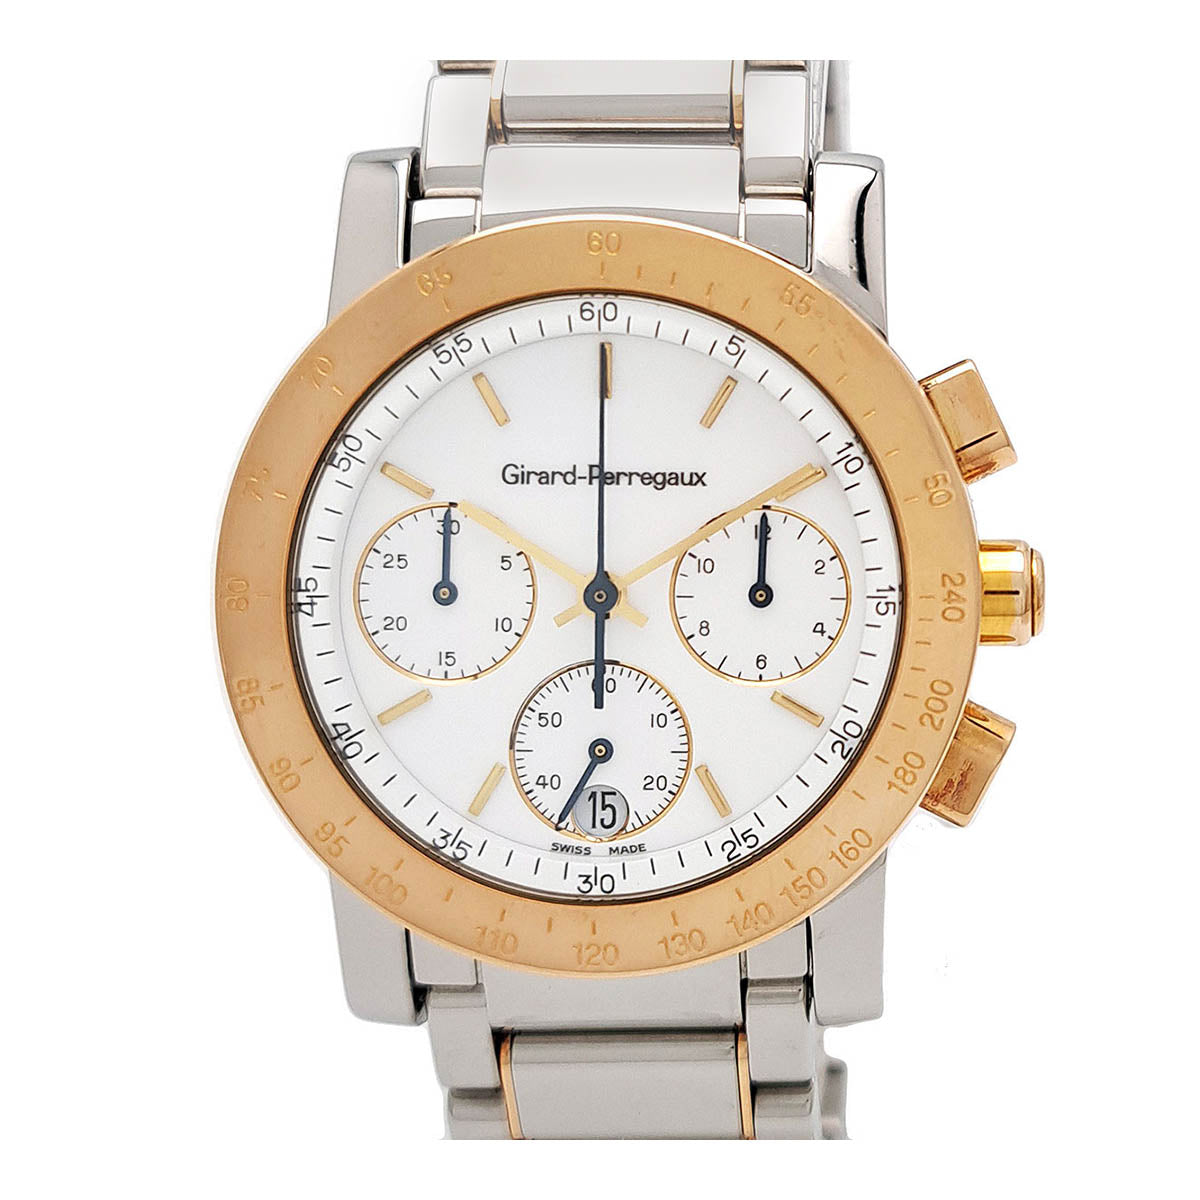 Girard-Perregaux 7001 Chronograph 7700 Quartz Watch, Stainless Steel & Gold Plated, Men's (Pre-owned) 7700.0